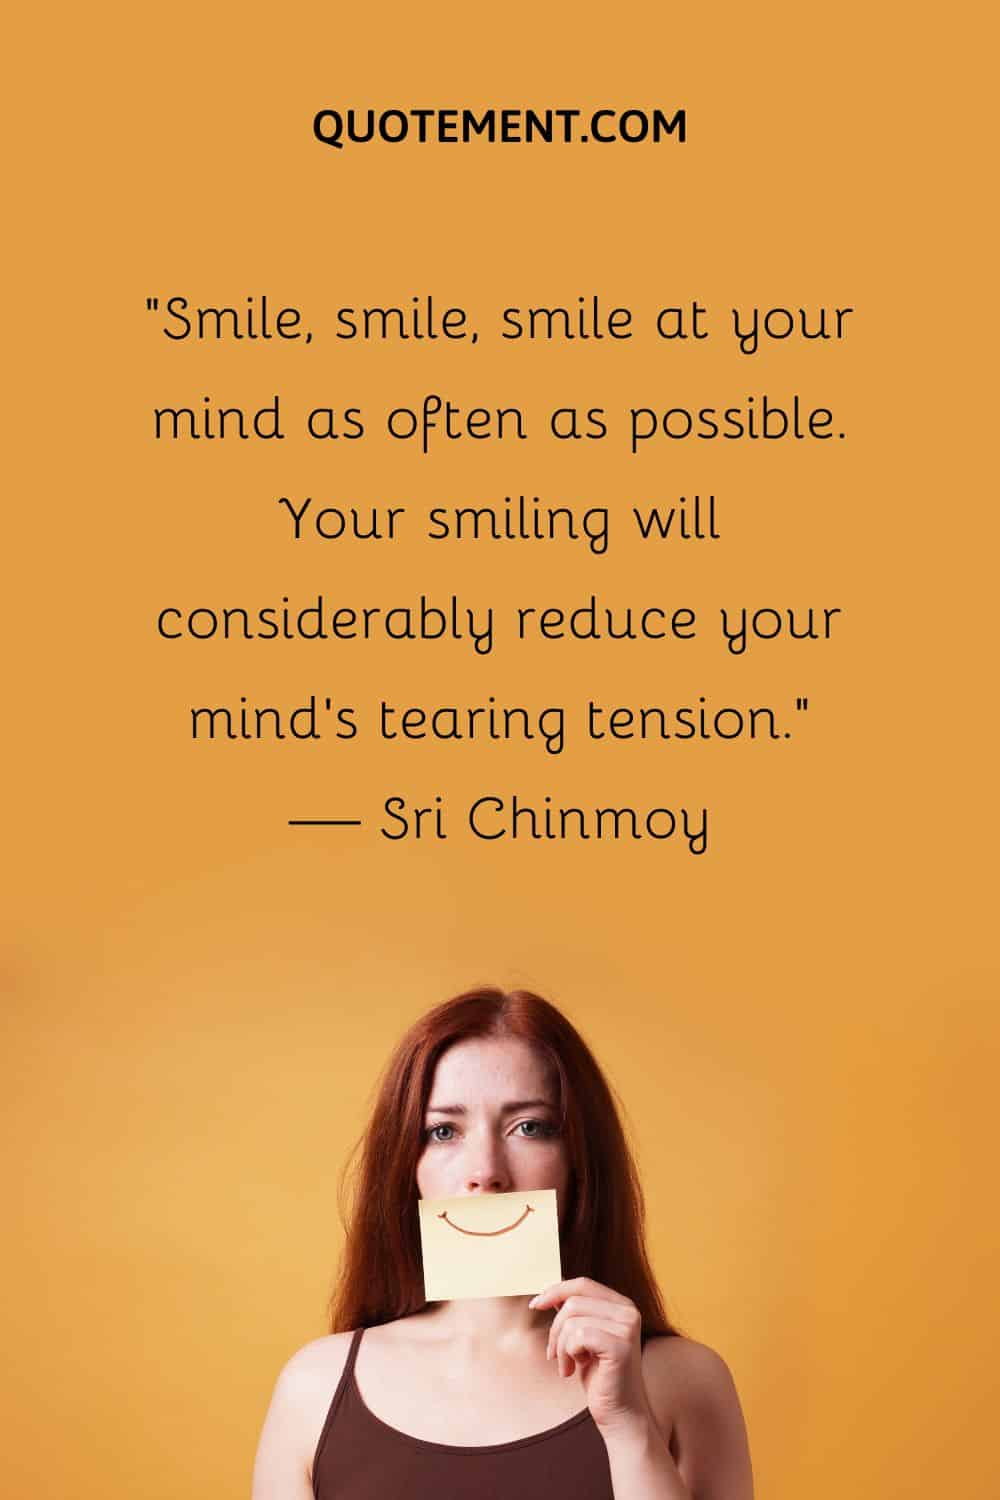 Smile, smile, smile at your mind as often as possible